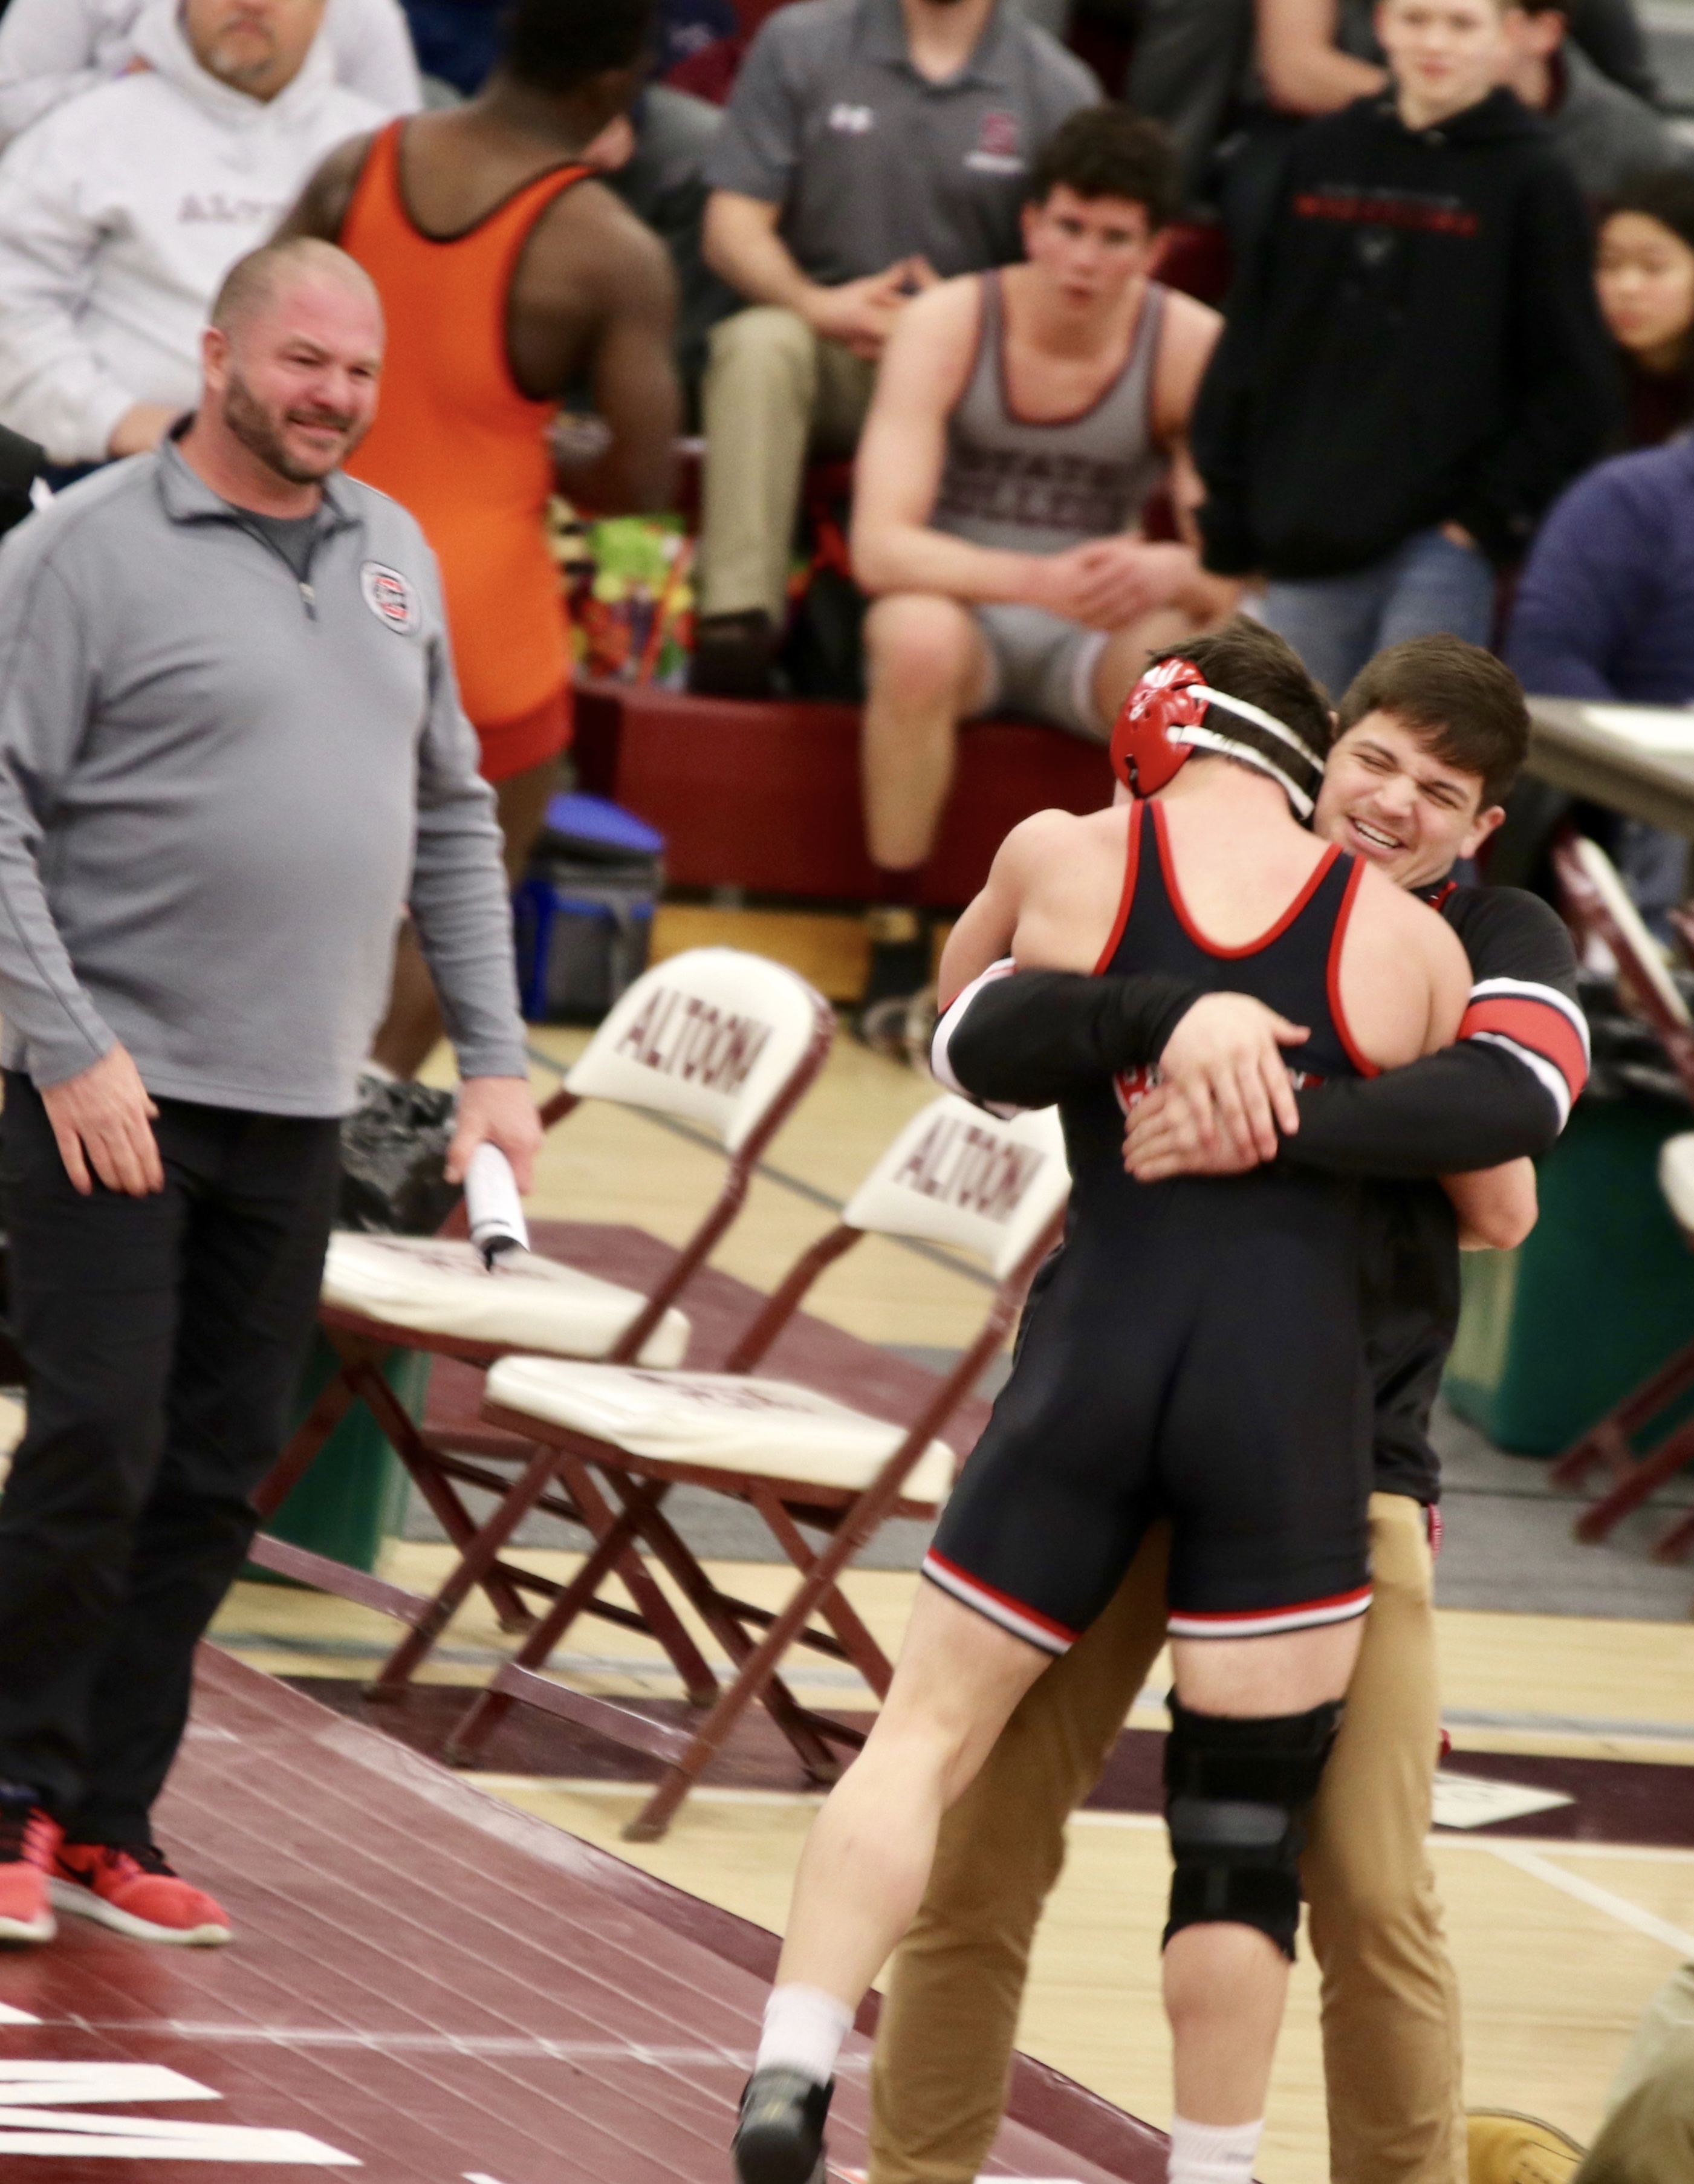 Mark Mcgonigal jumps into the arms of his brother Luke after winning his regional semi-finals bout. This will be the fifth year in a row with a McGonigal boy making noise at the PIAA State Tournament.